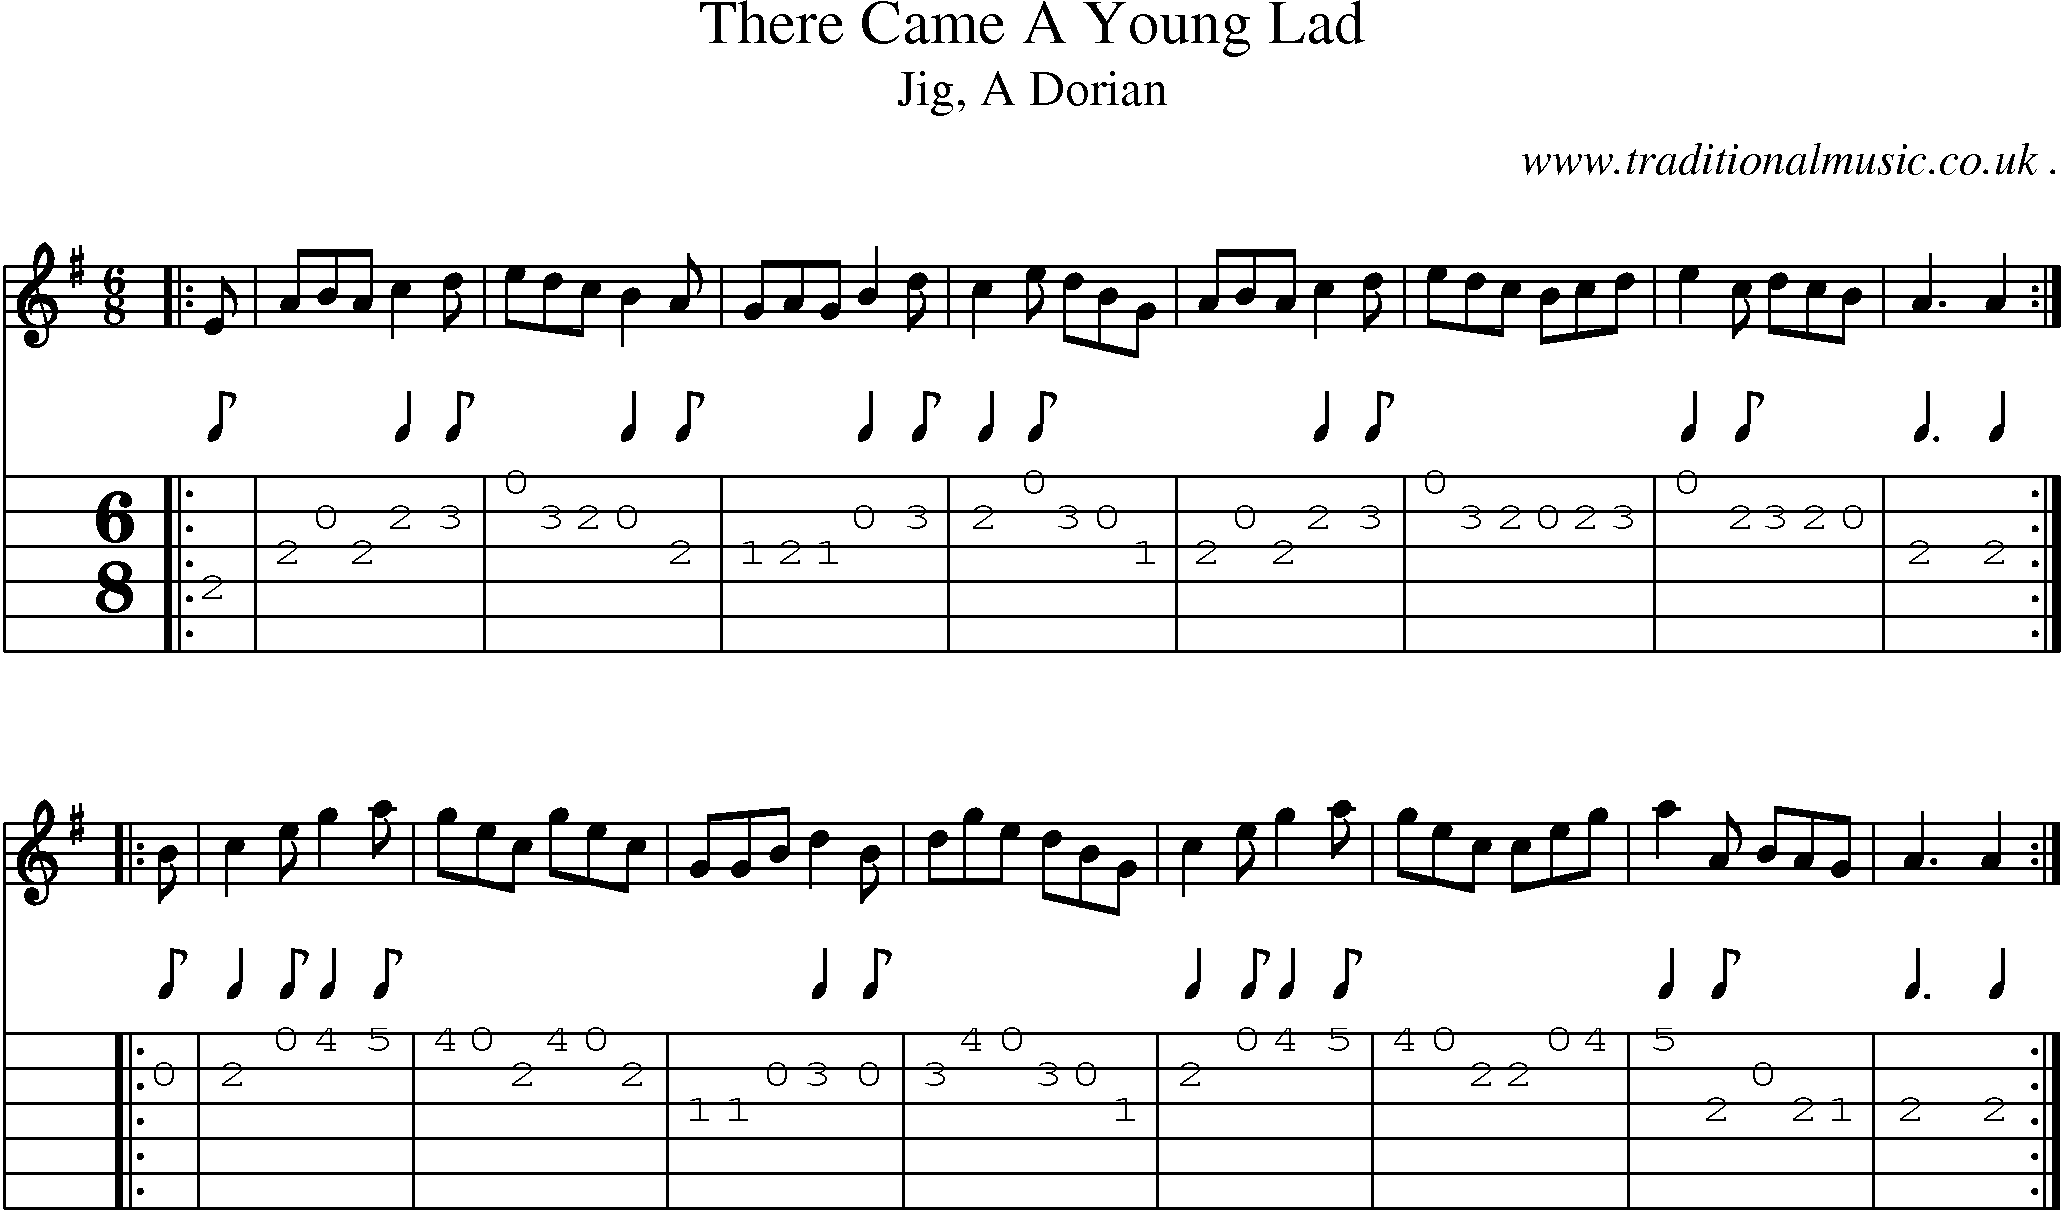 Sheet-music  score, Chords and Guitar Tabs for There Came A Young Lad